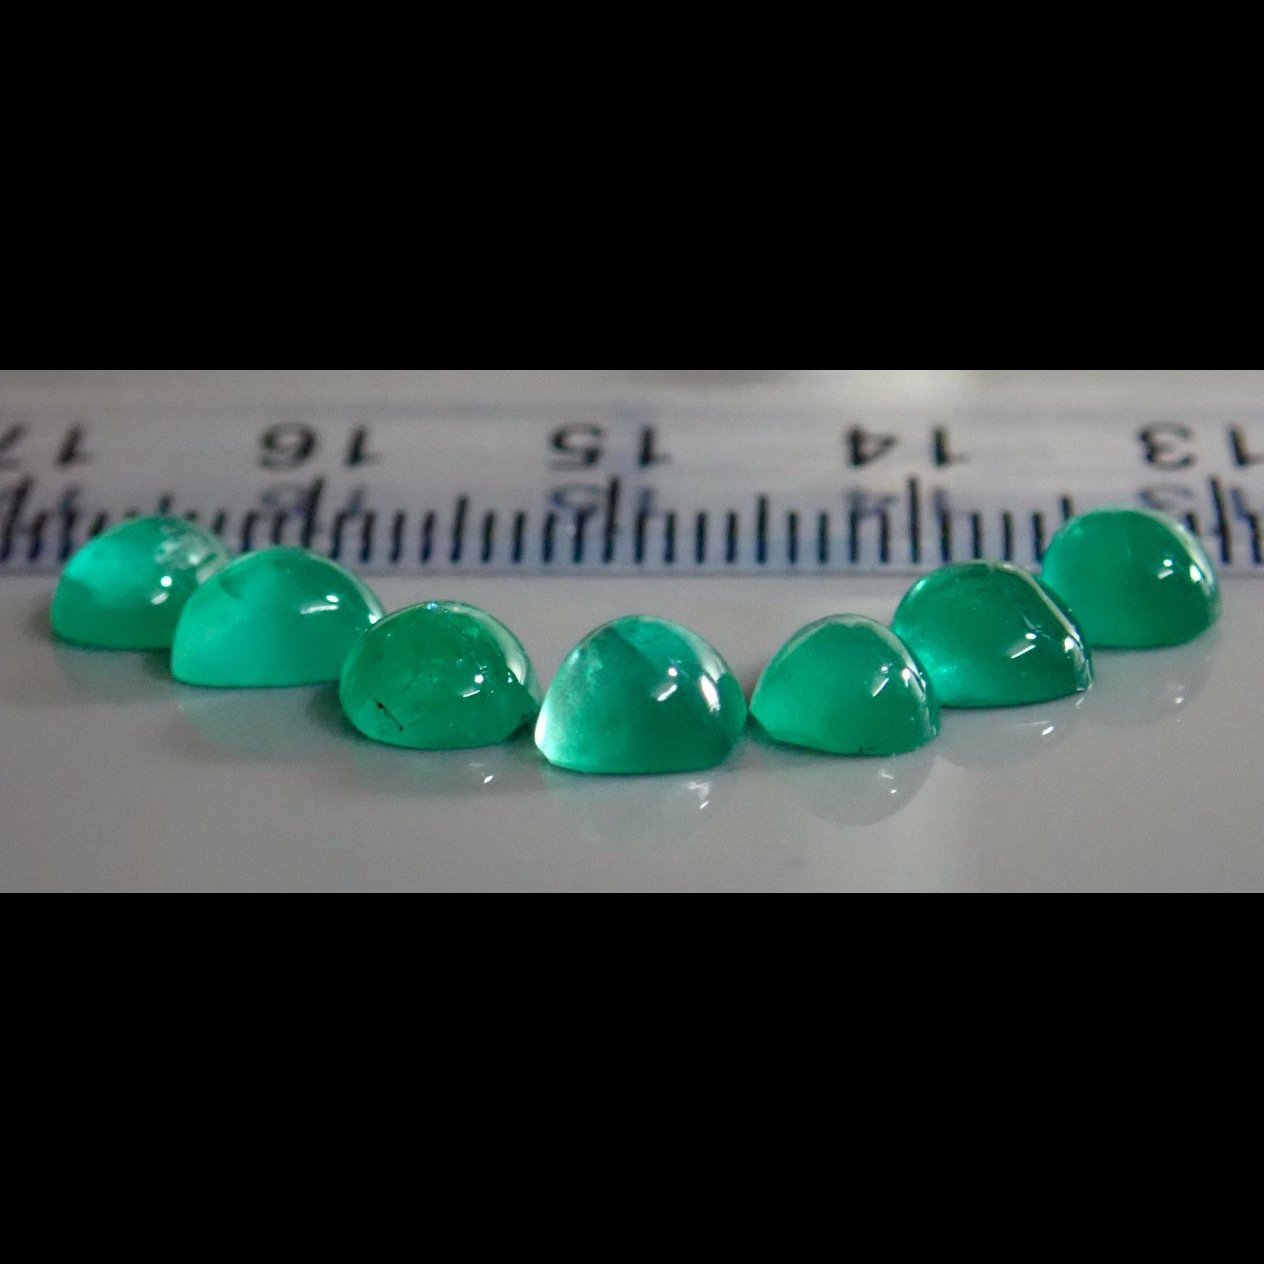 6.67ct Emerald Lot, Tanzania (near Zambia border, almost identical to Zambian material) Untreated Unheated NO OIL. 0.79ct-1.03ct-Gems Of East Africa